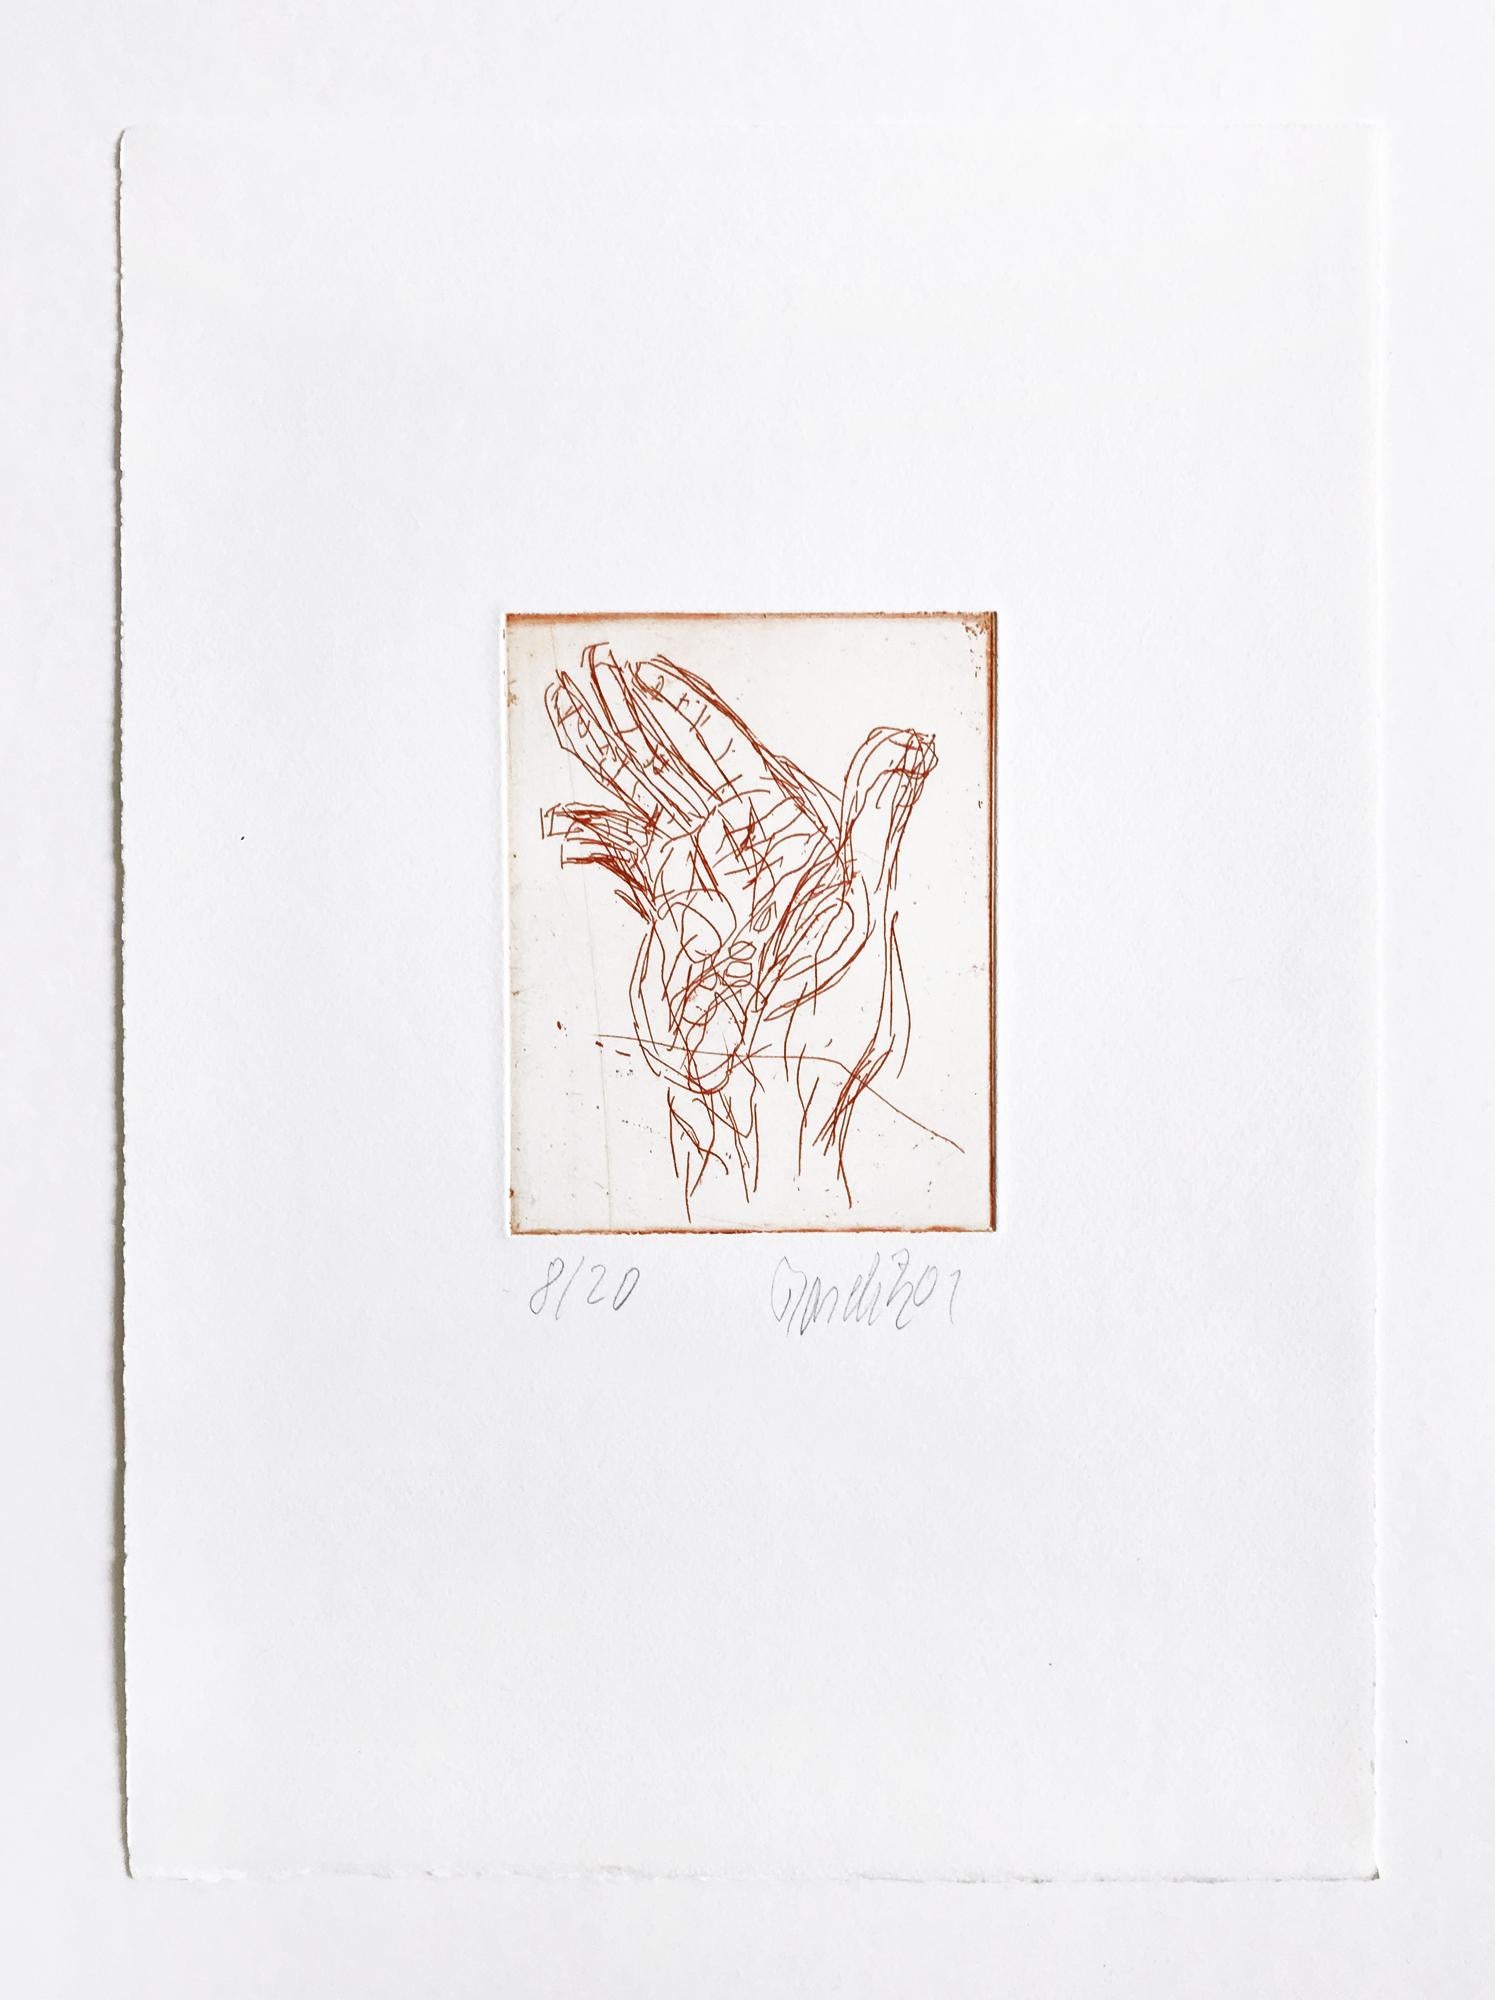 Hand // Etching // Neo Expressionist // Contemporary Art // 21st Century - Print by Georg Baselitz